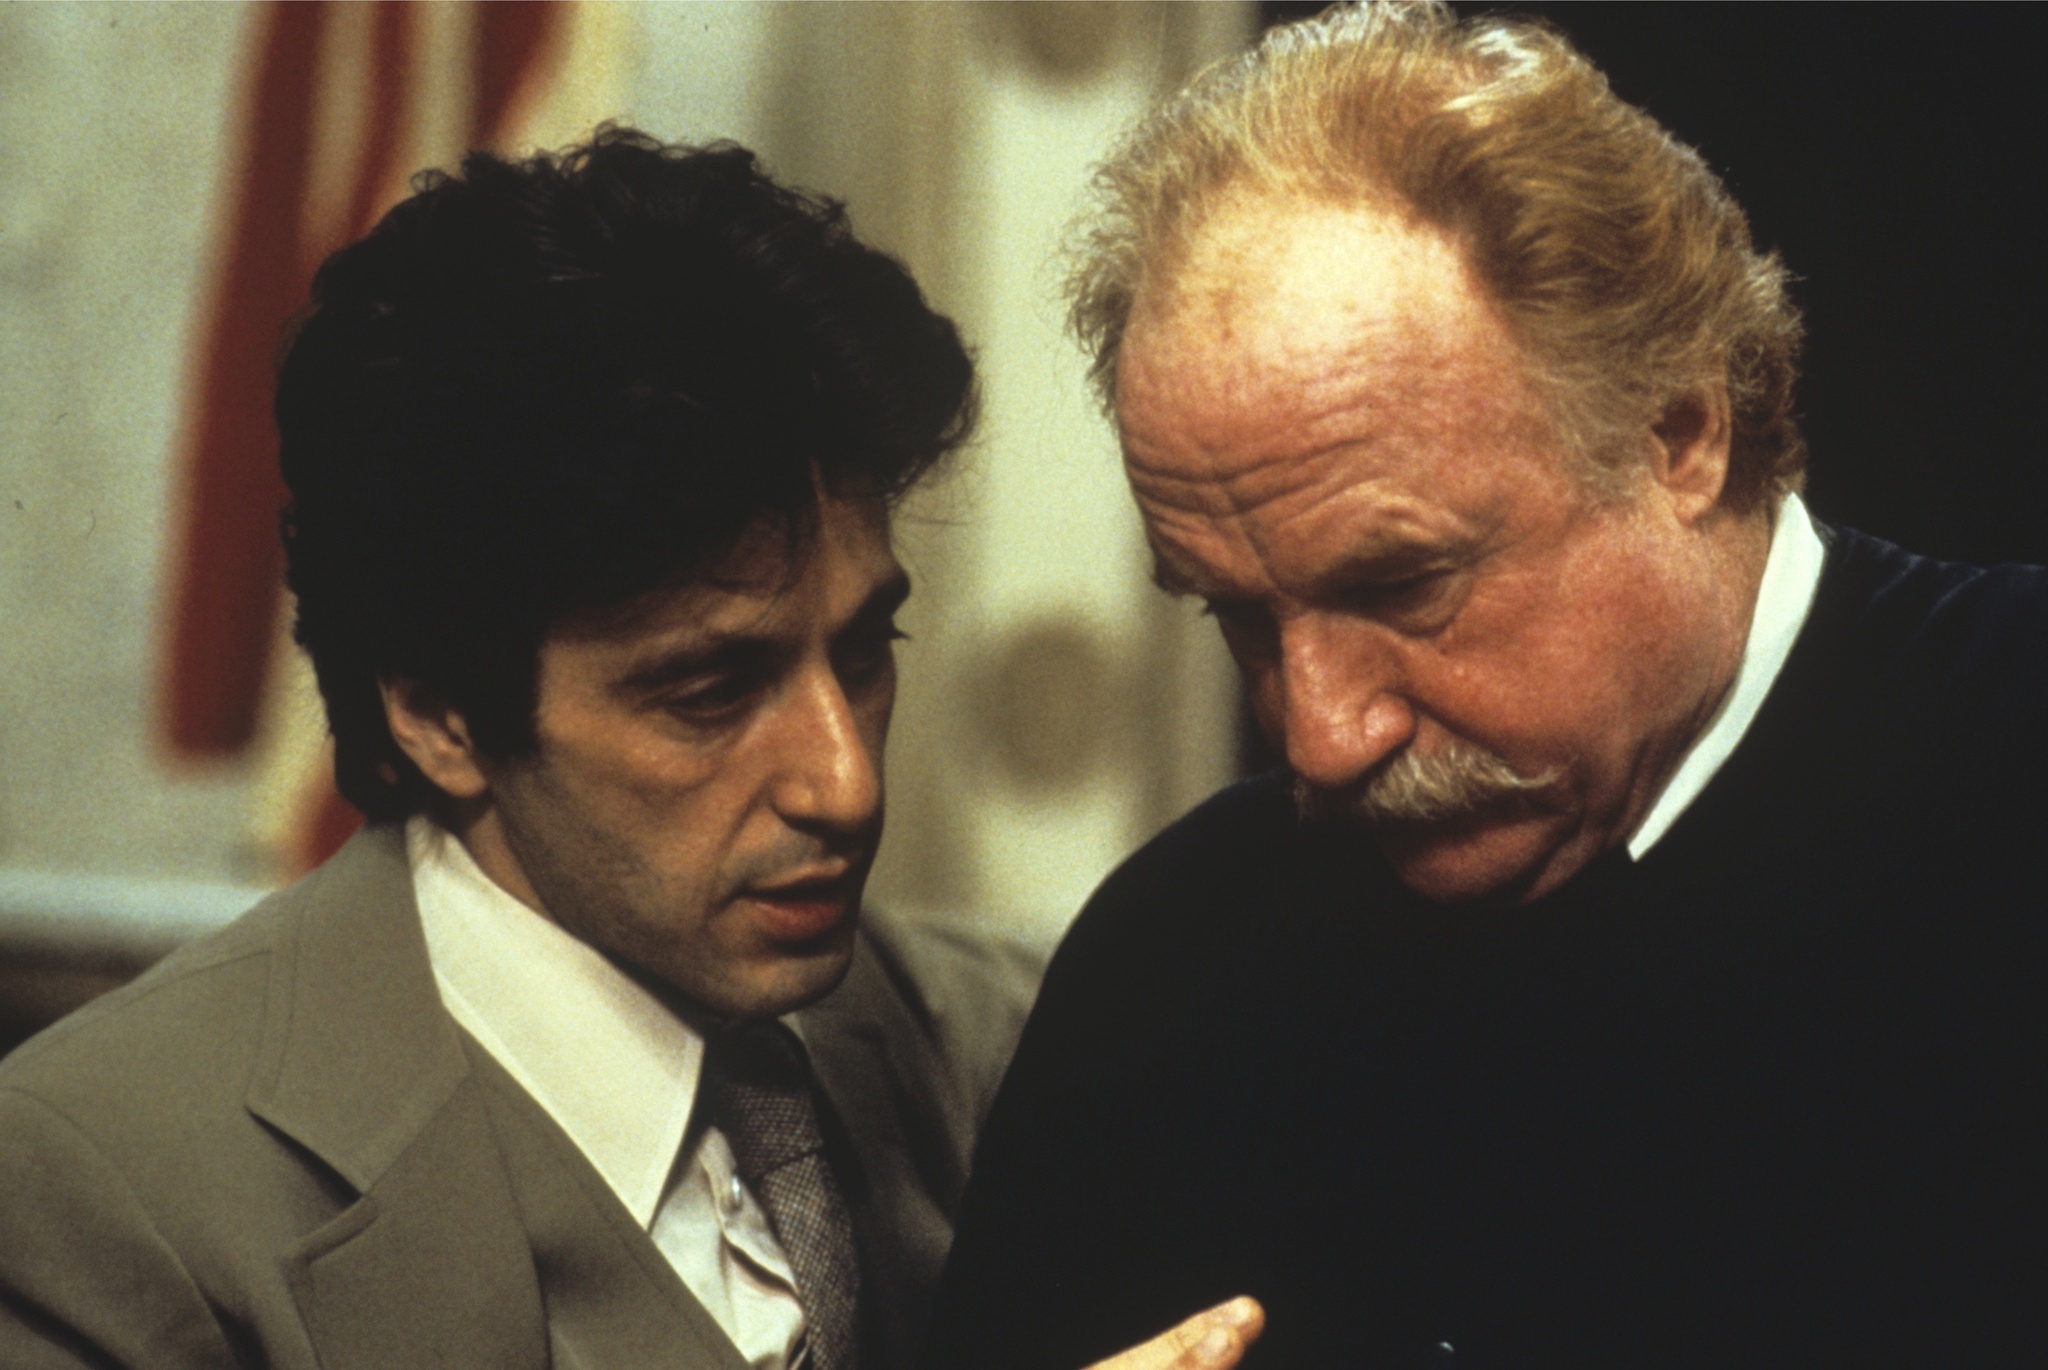 Still of Al Pacino and Jack Warden in ...And Justice for All. (1979)